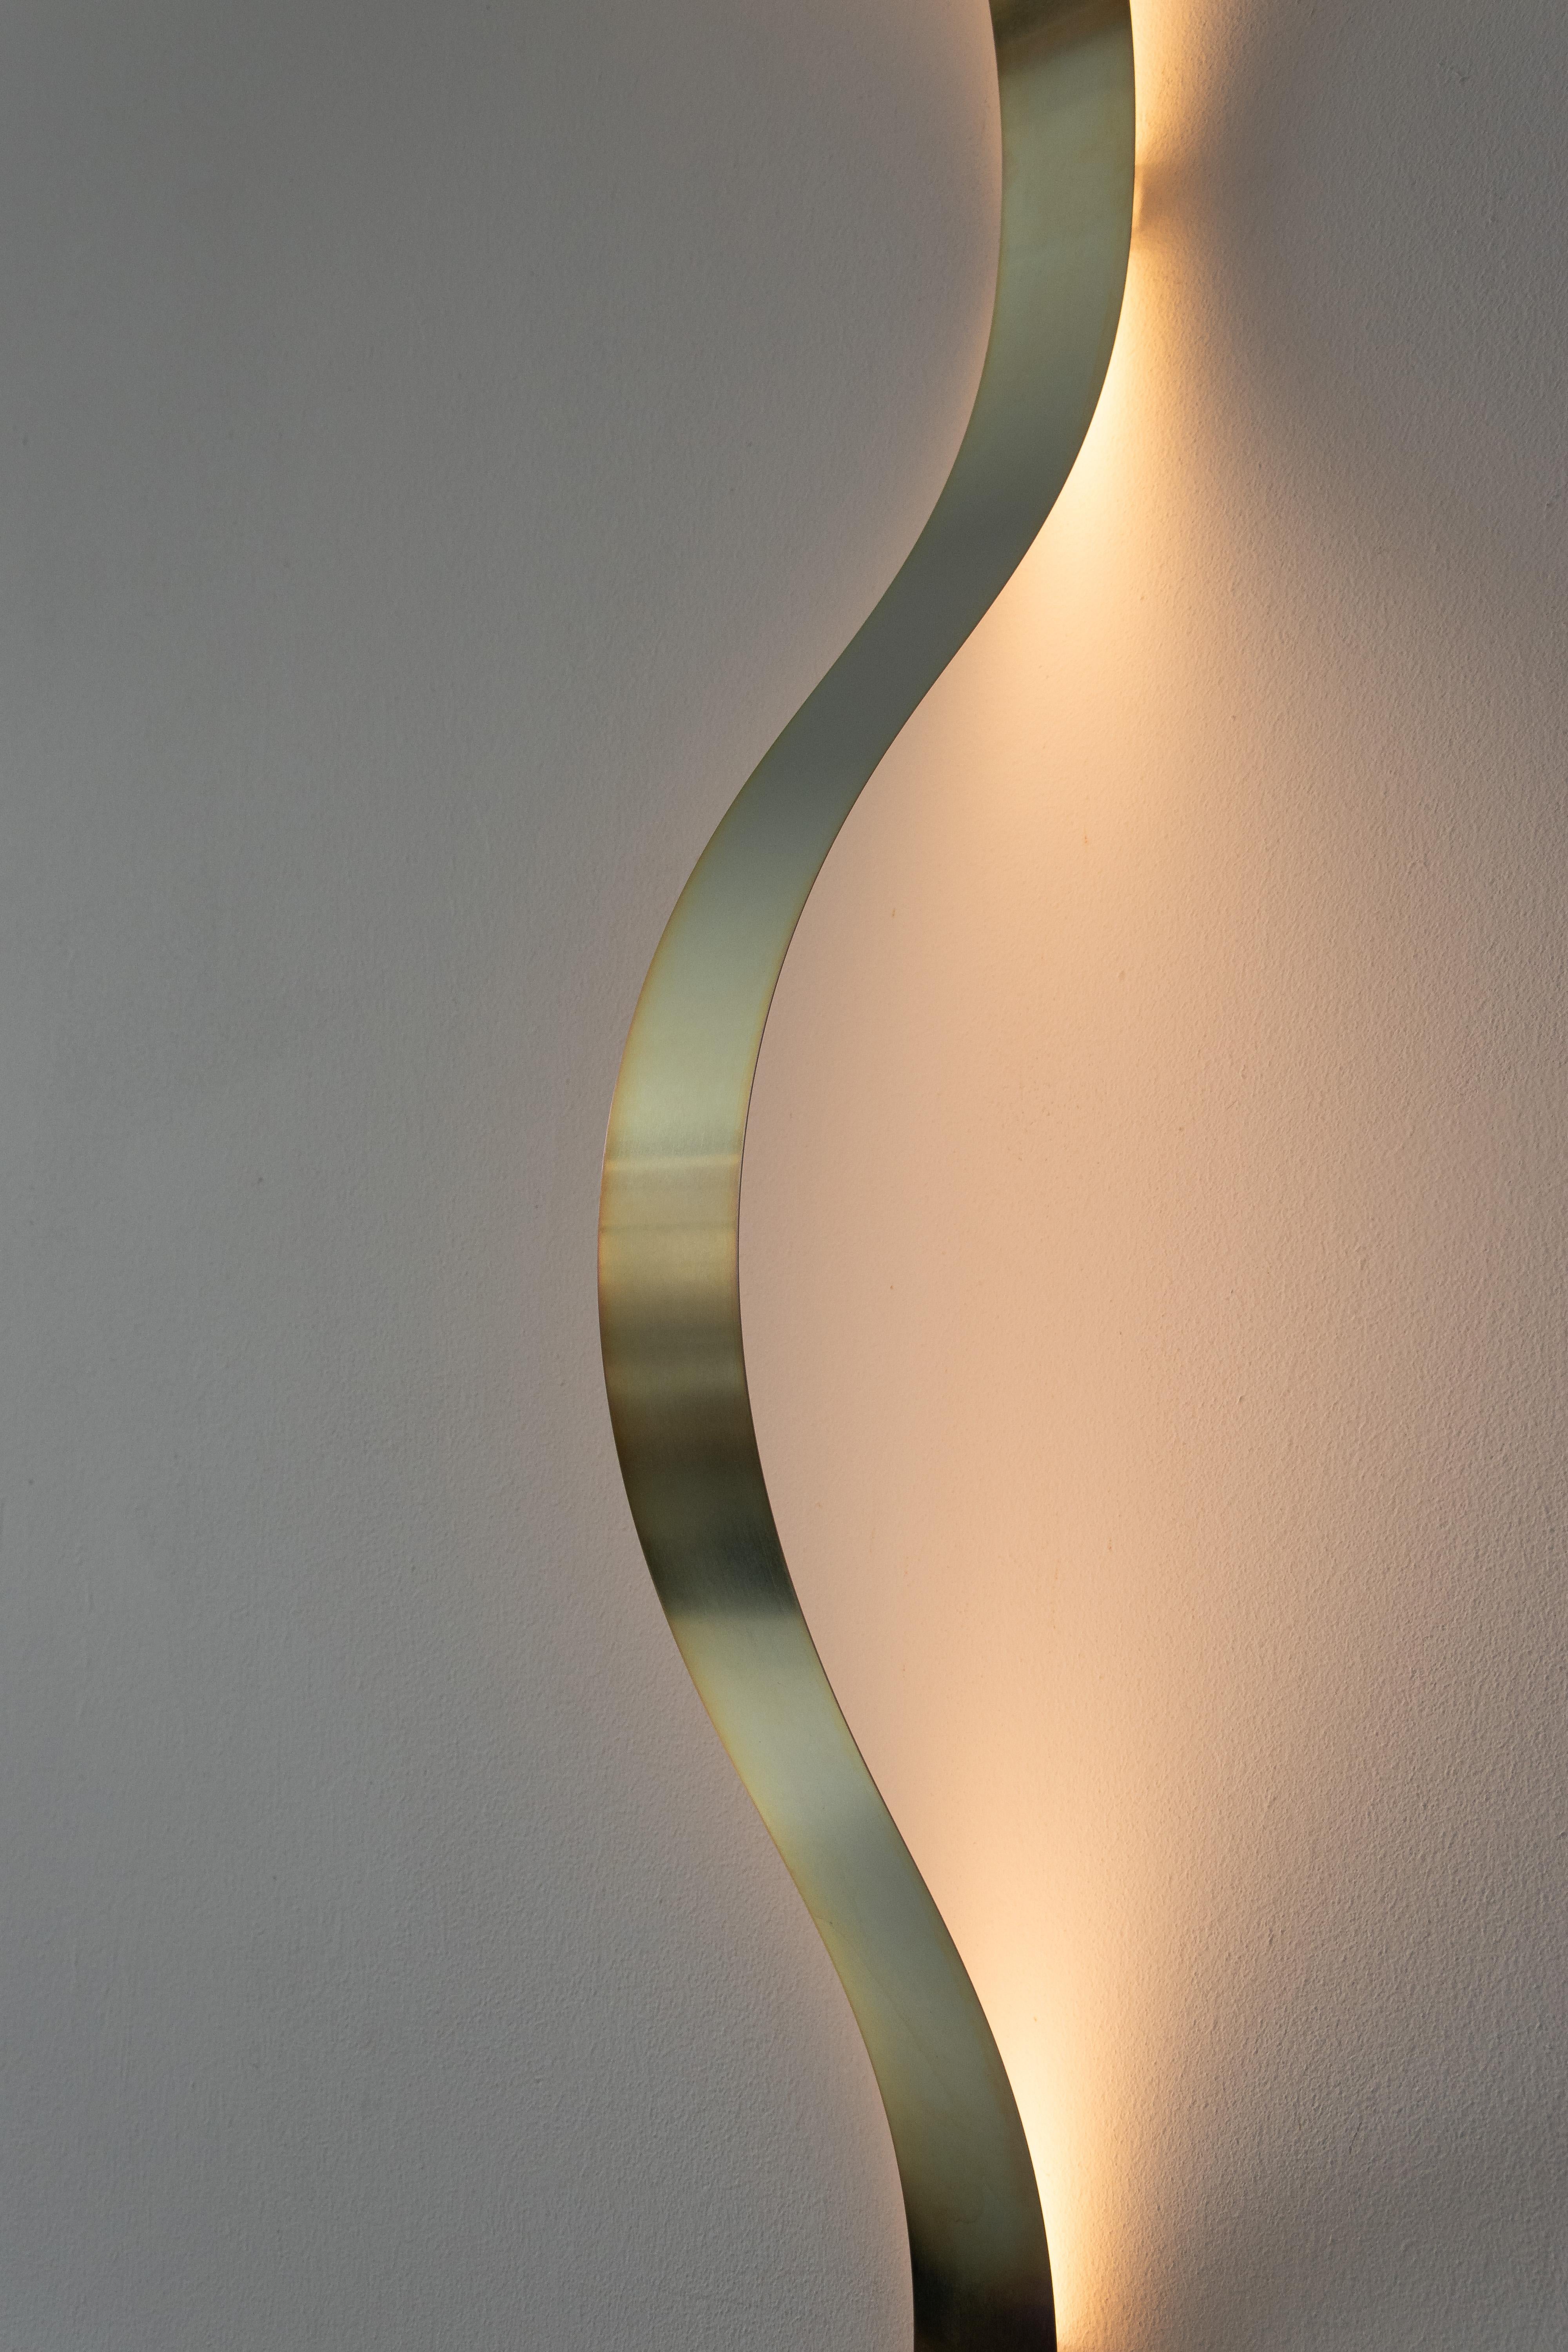 The Sine Lights are made out of powdercoated spring steel strips. By fixing the lamp to the wall or ceiling with small brackets, the wave form appears as a result of the tension in the material.

The LED lighting on the back gives of a pleasant